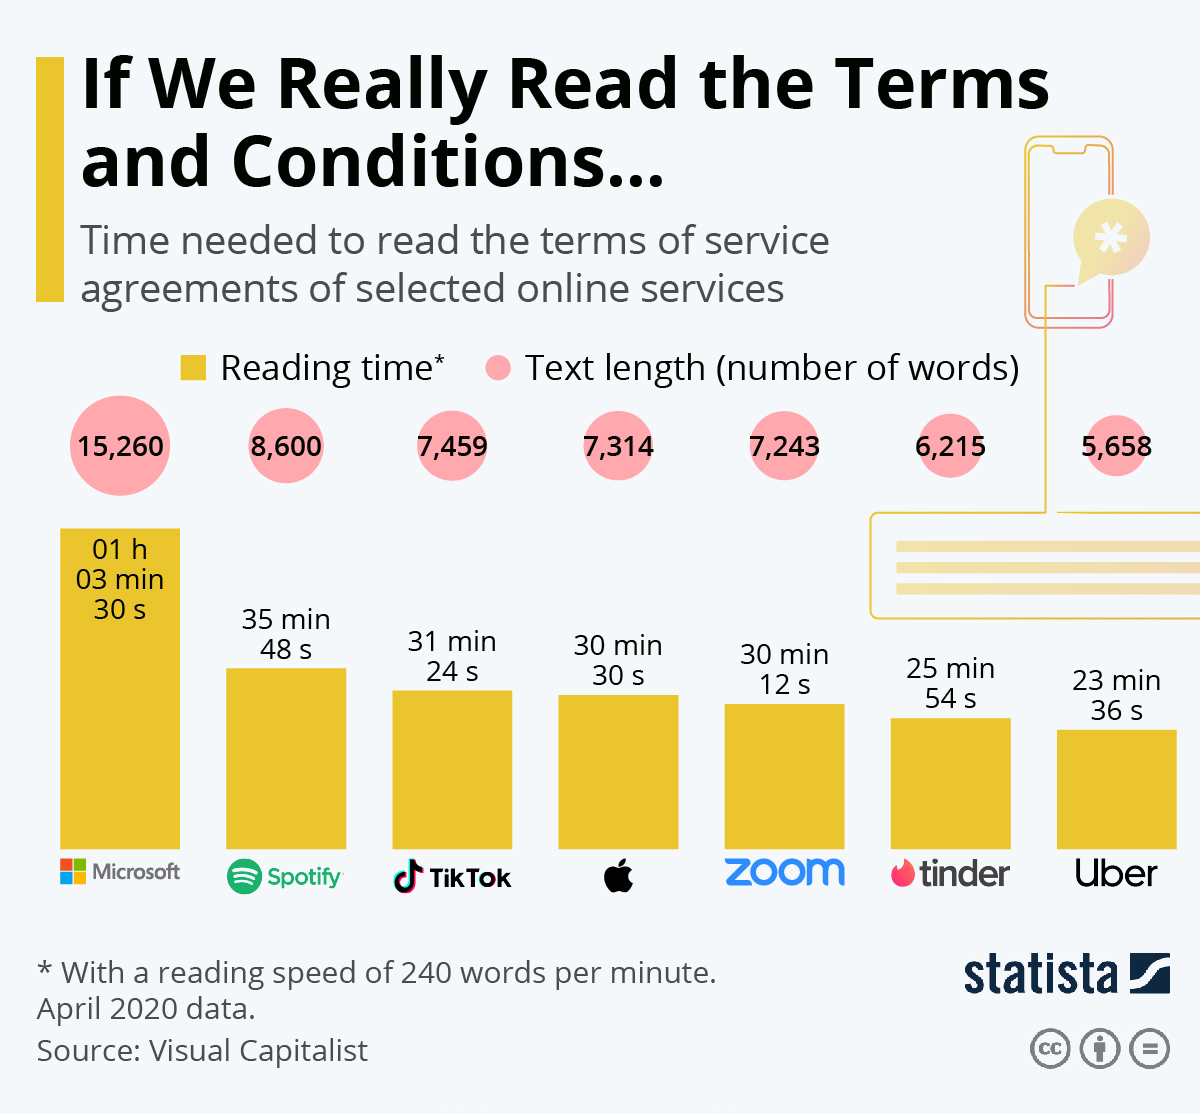 97% of people between 18 and 34 years old accept the conditions without reading them